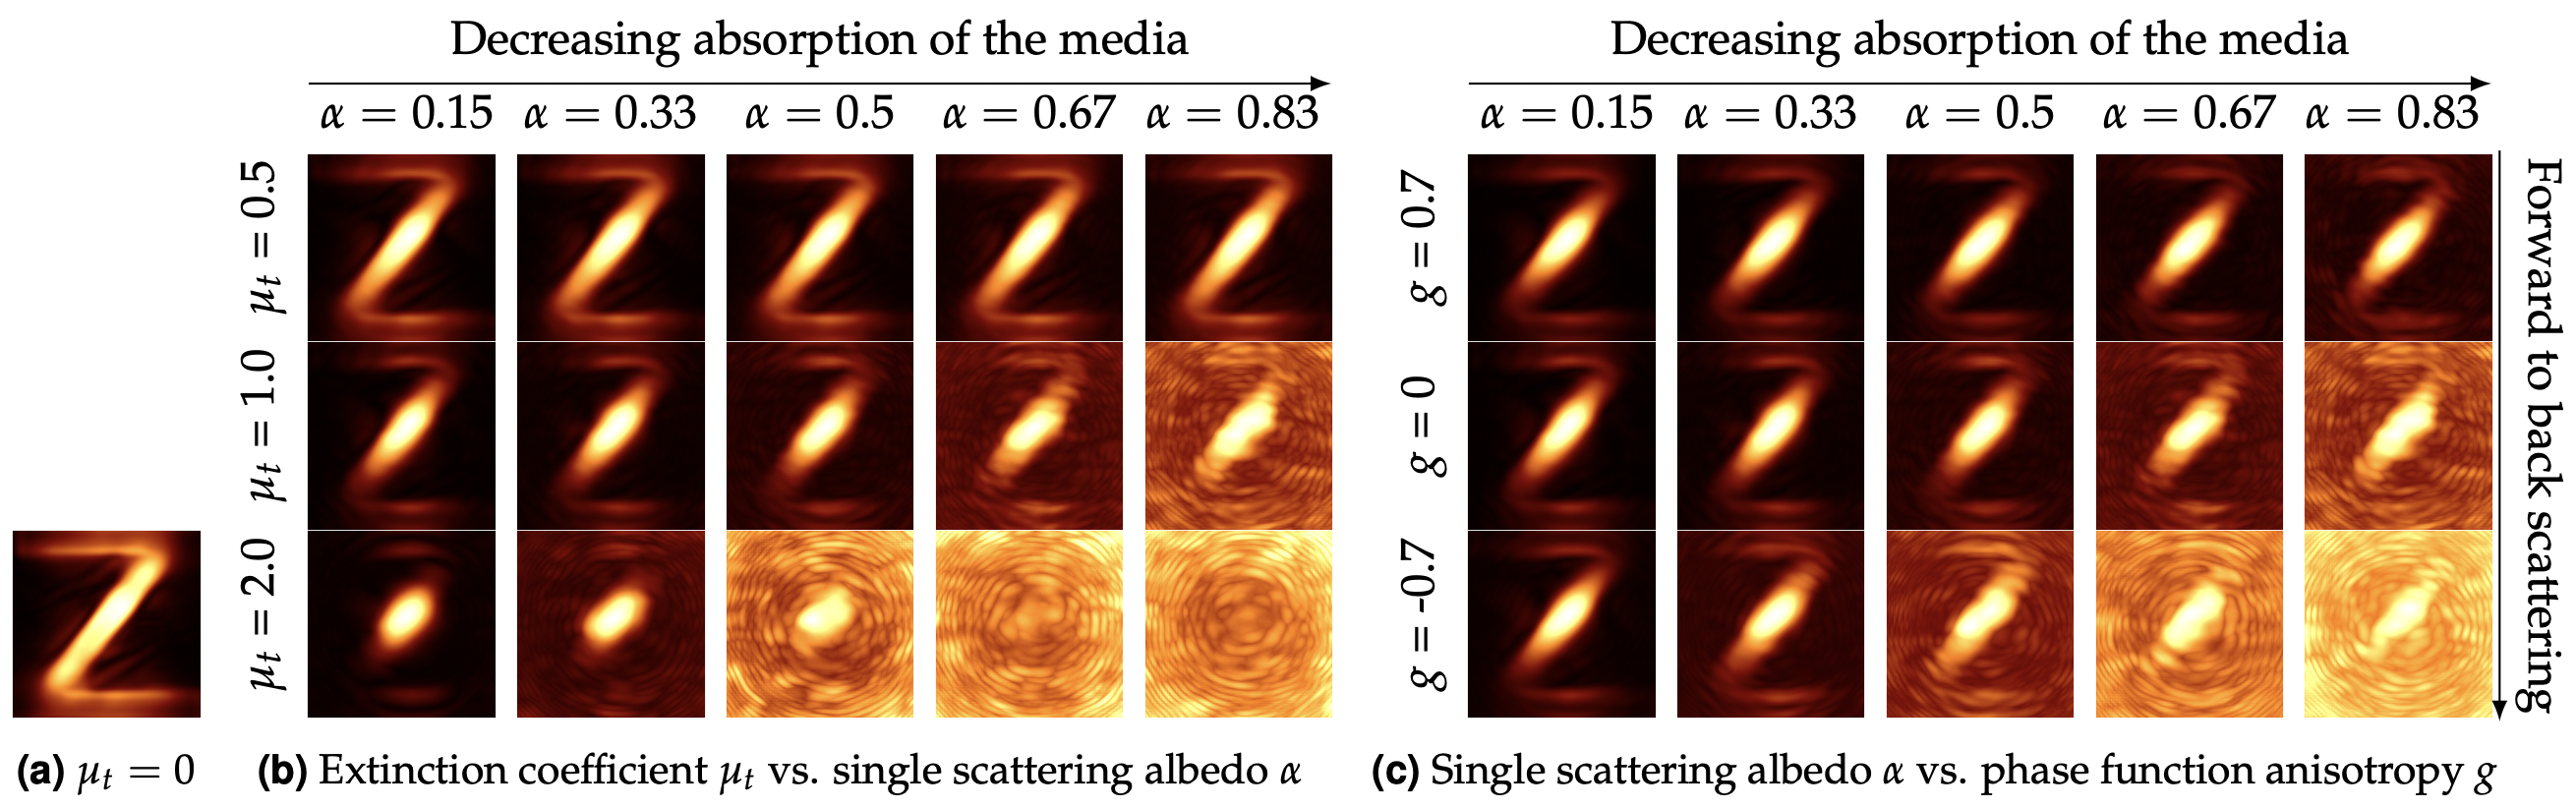 Reconstructions of the Z-LETTER scene. a) scene with no scattering media. b) reconstructions with scattering media of varying extinction µt (in m−1) and single scattering albedo α. c) reconstructions with scattering media of fixed extinction µt = 1 m−1, varying scattering albedo α, and phase function’s anisotropy g. Phasor Fields is able to reconstruct the scene even in the presence of highly scattering media.